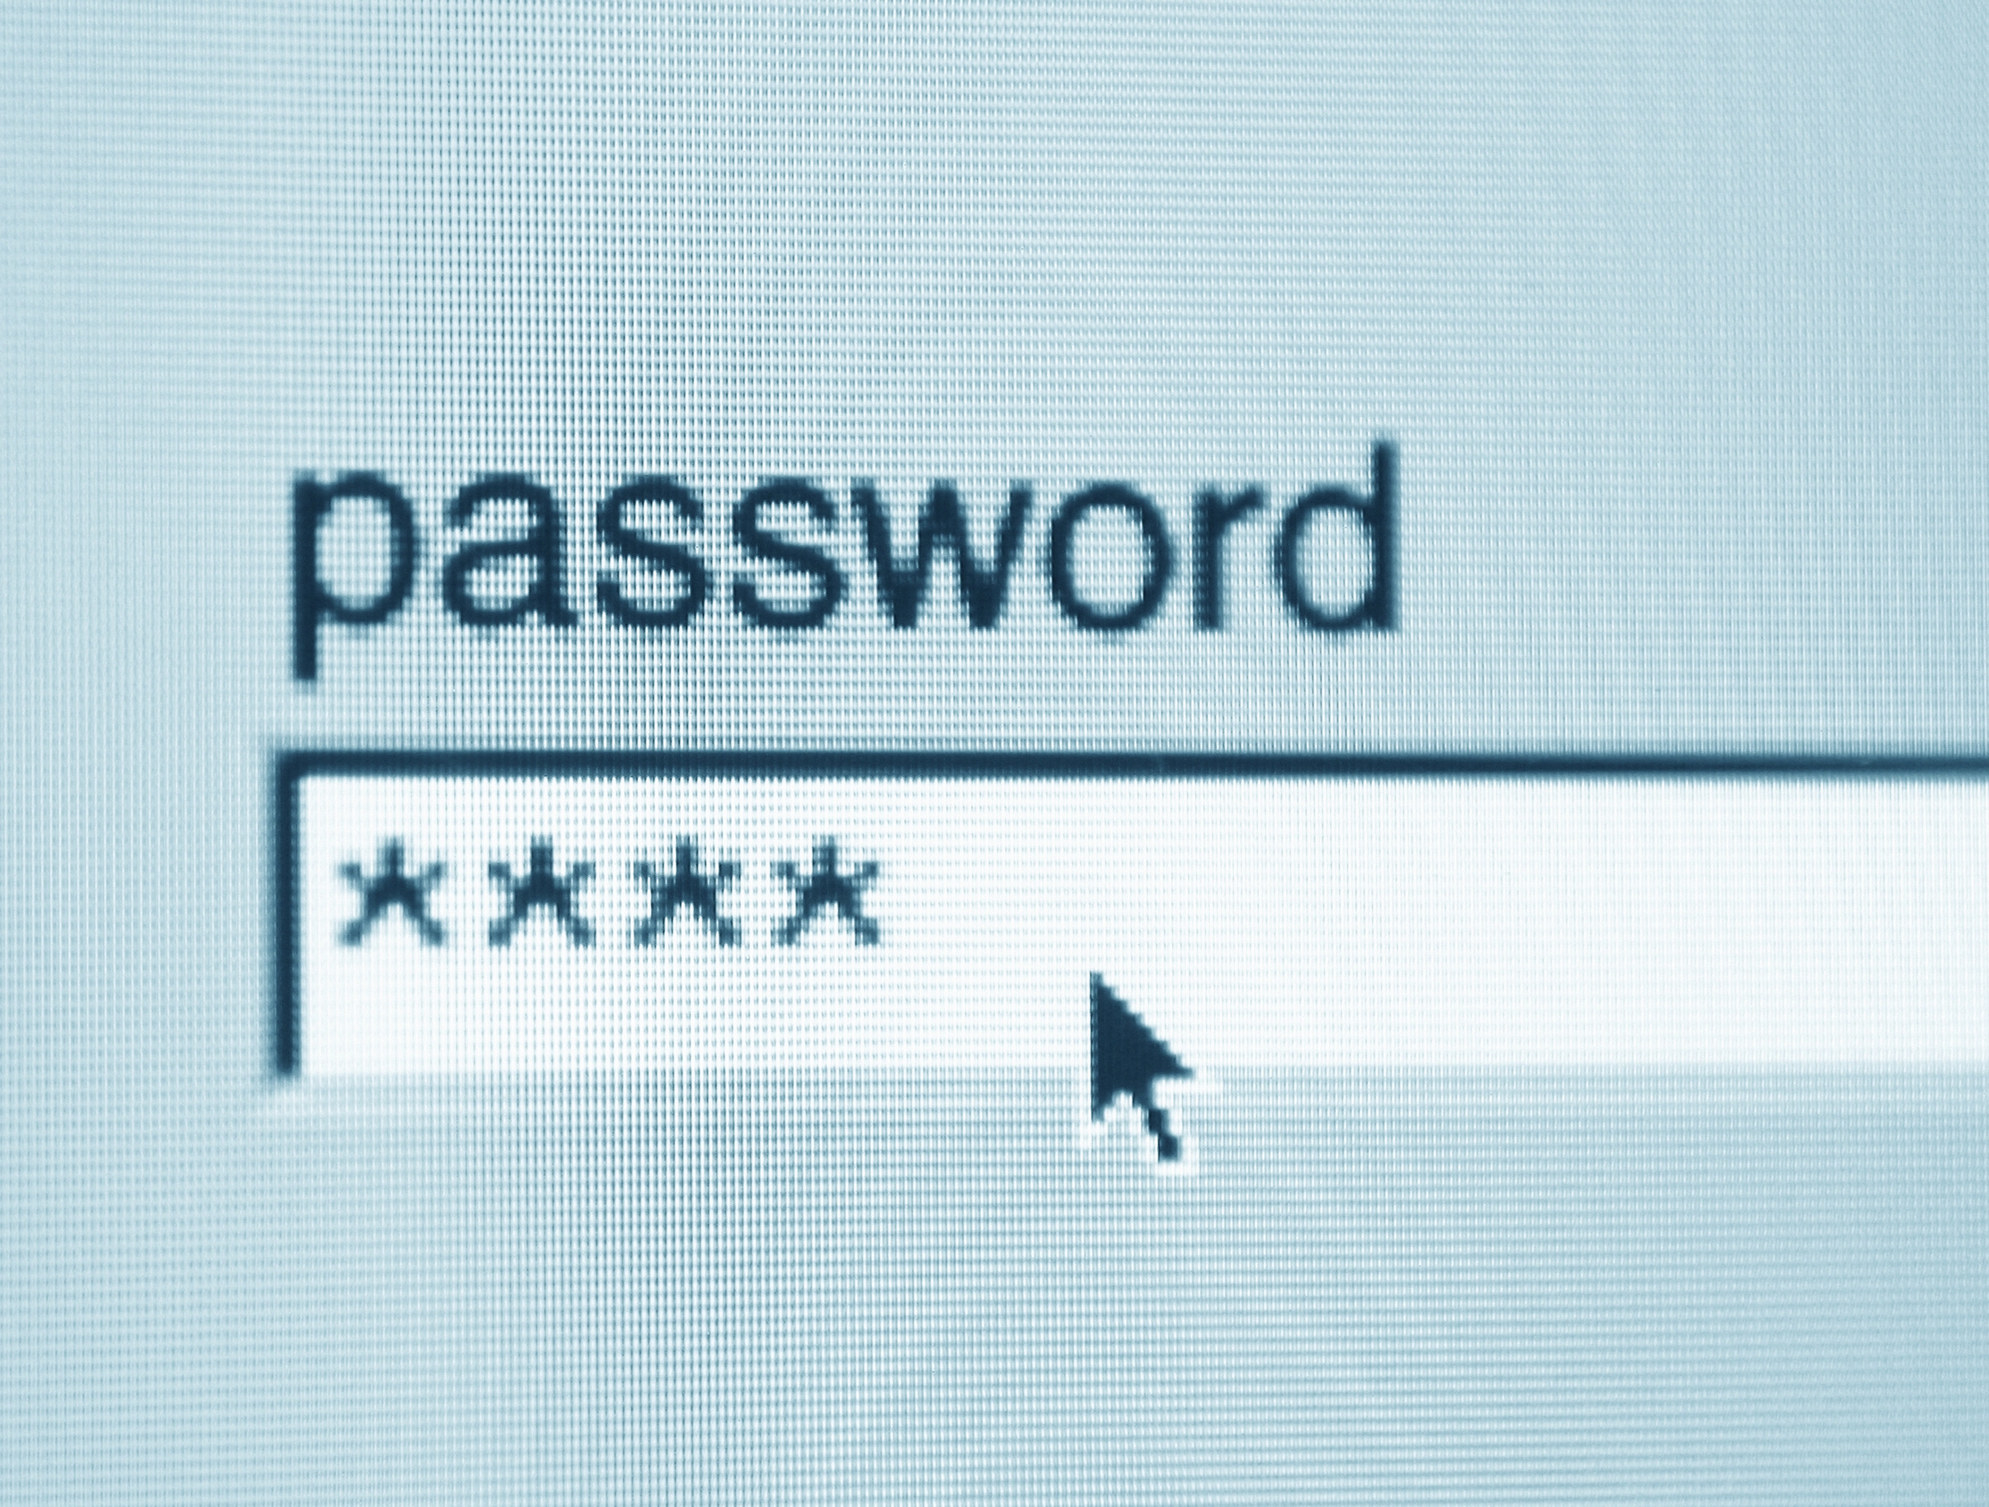 Screenshot of a password being entered on a computer